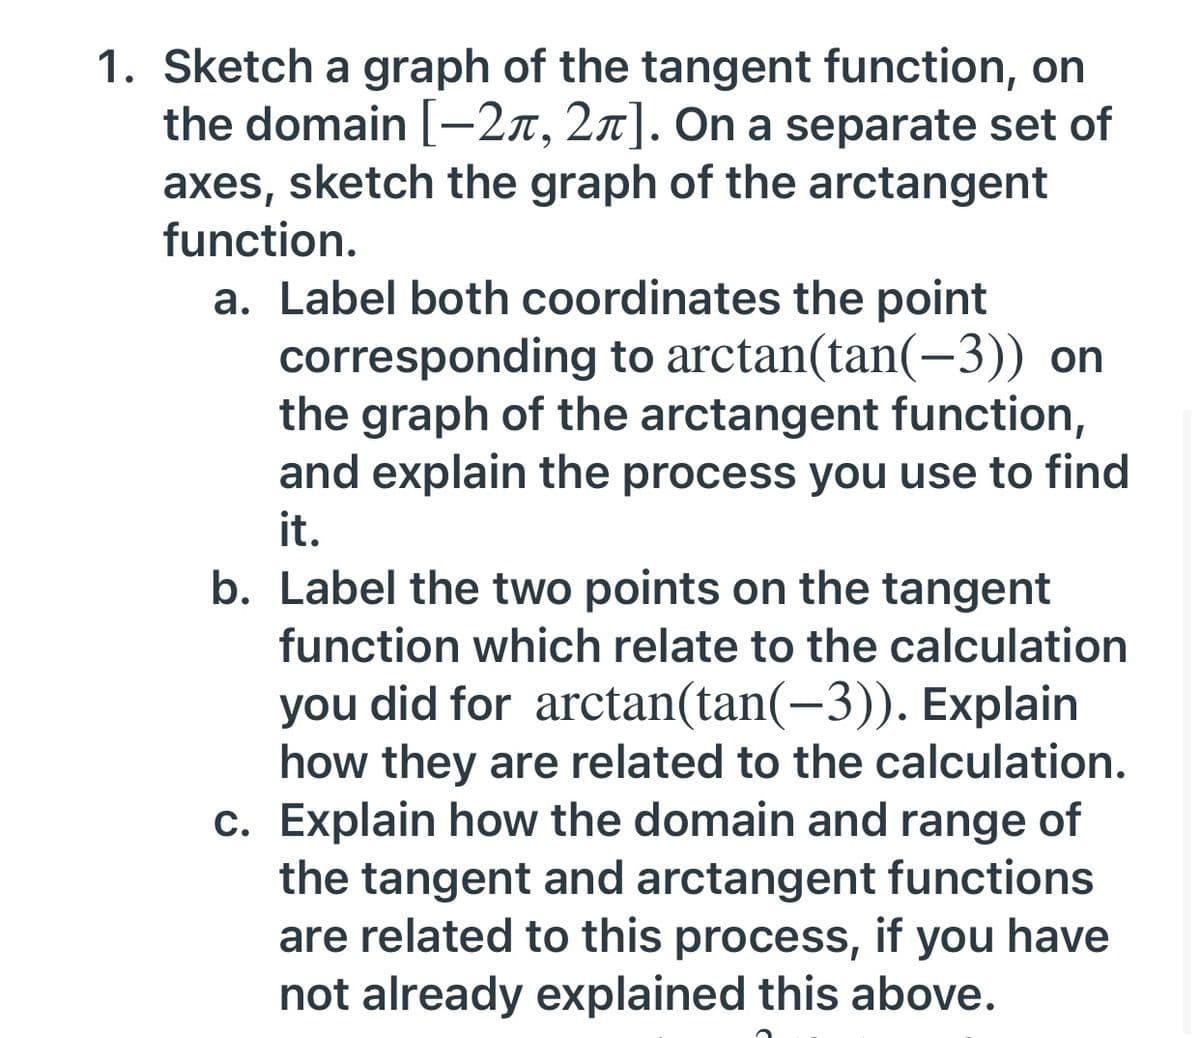 1. Sketch a graph of the tangent function, on
the domain [-27, 2n]. On a separate set of
axes, sketch the graph of the arctangent
function.
a. Label both coordinates the point
corresponding to arctan(tan(-3)) on
the graph of the arctangent function,
and explain the process you use to find
it.
b. Label the two points on the tangent
function which relate to the calculation
you did for arctan(tan(-3)). Explain
how they are related to the calculation.
c. Explain how the domain and range of
the tangent and arctangent functions
are related to this process, if you have
not already explained this above.
